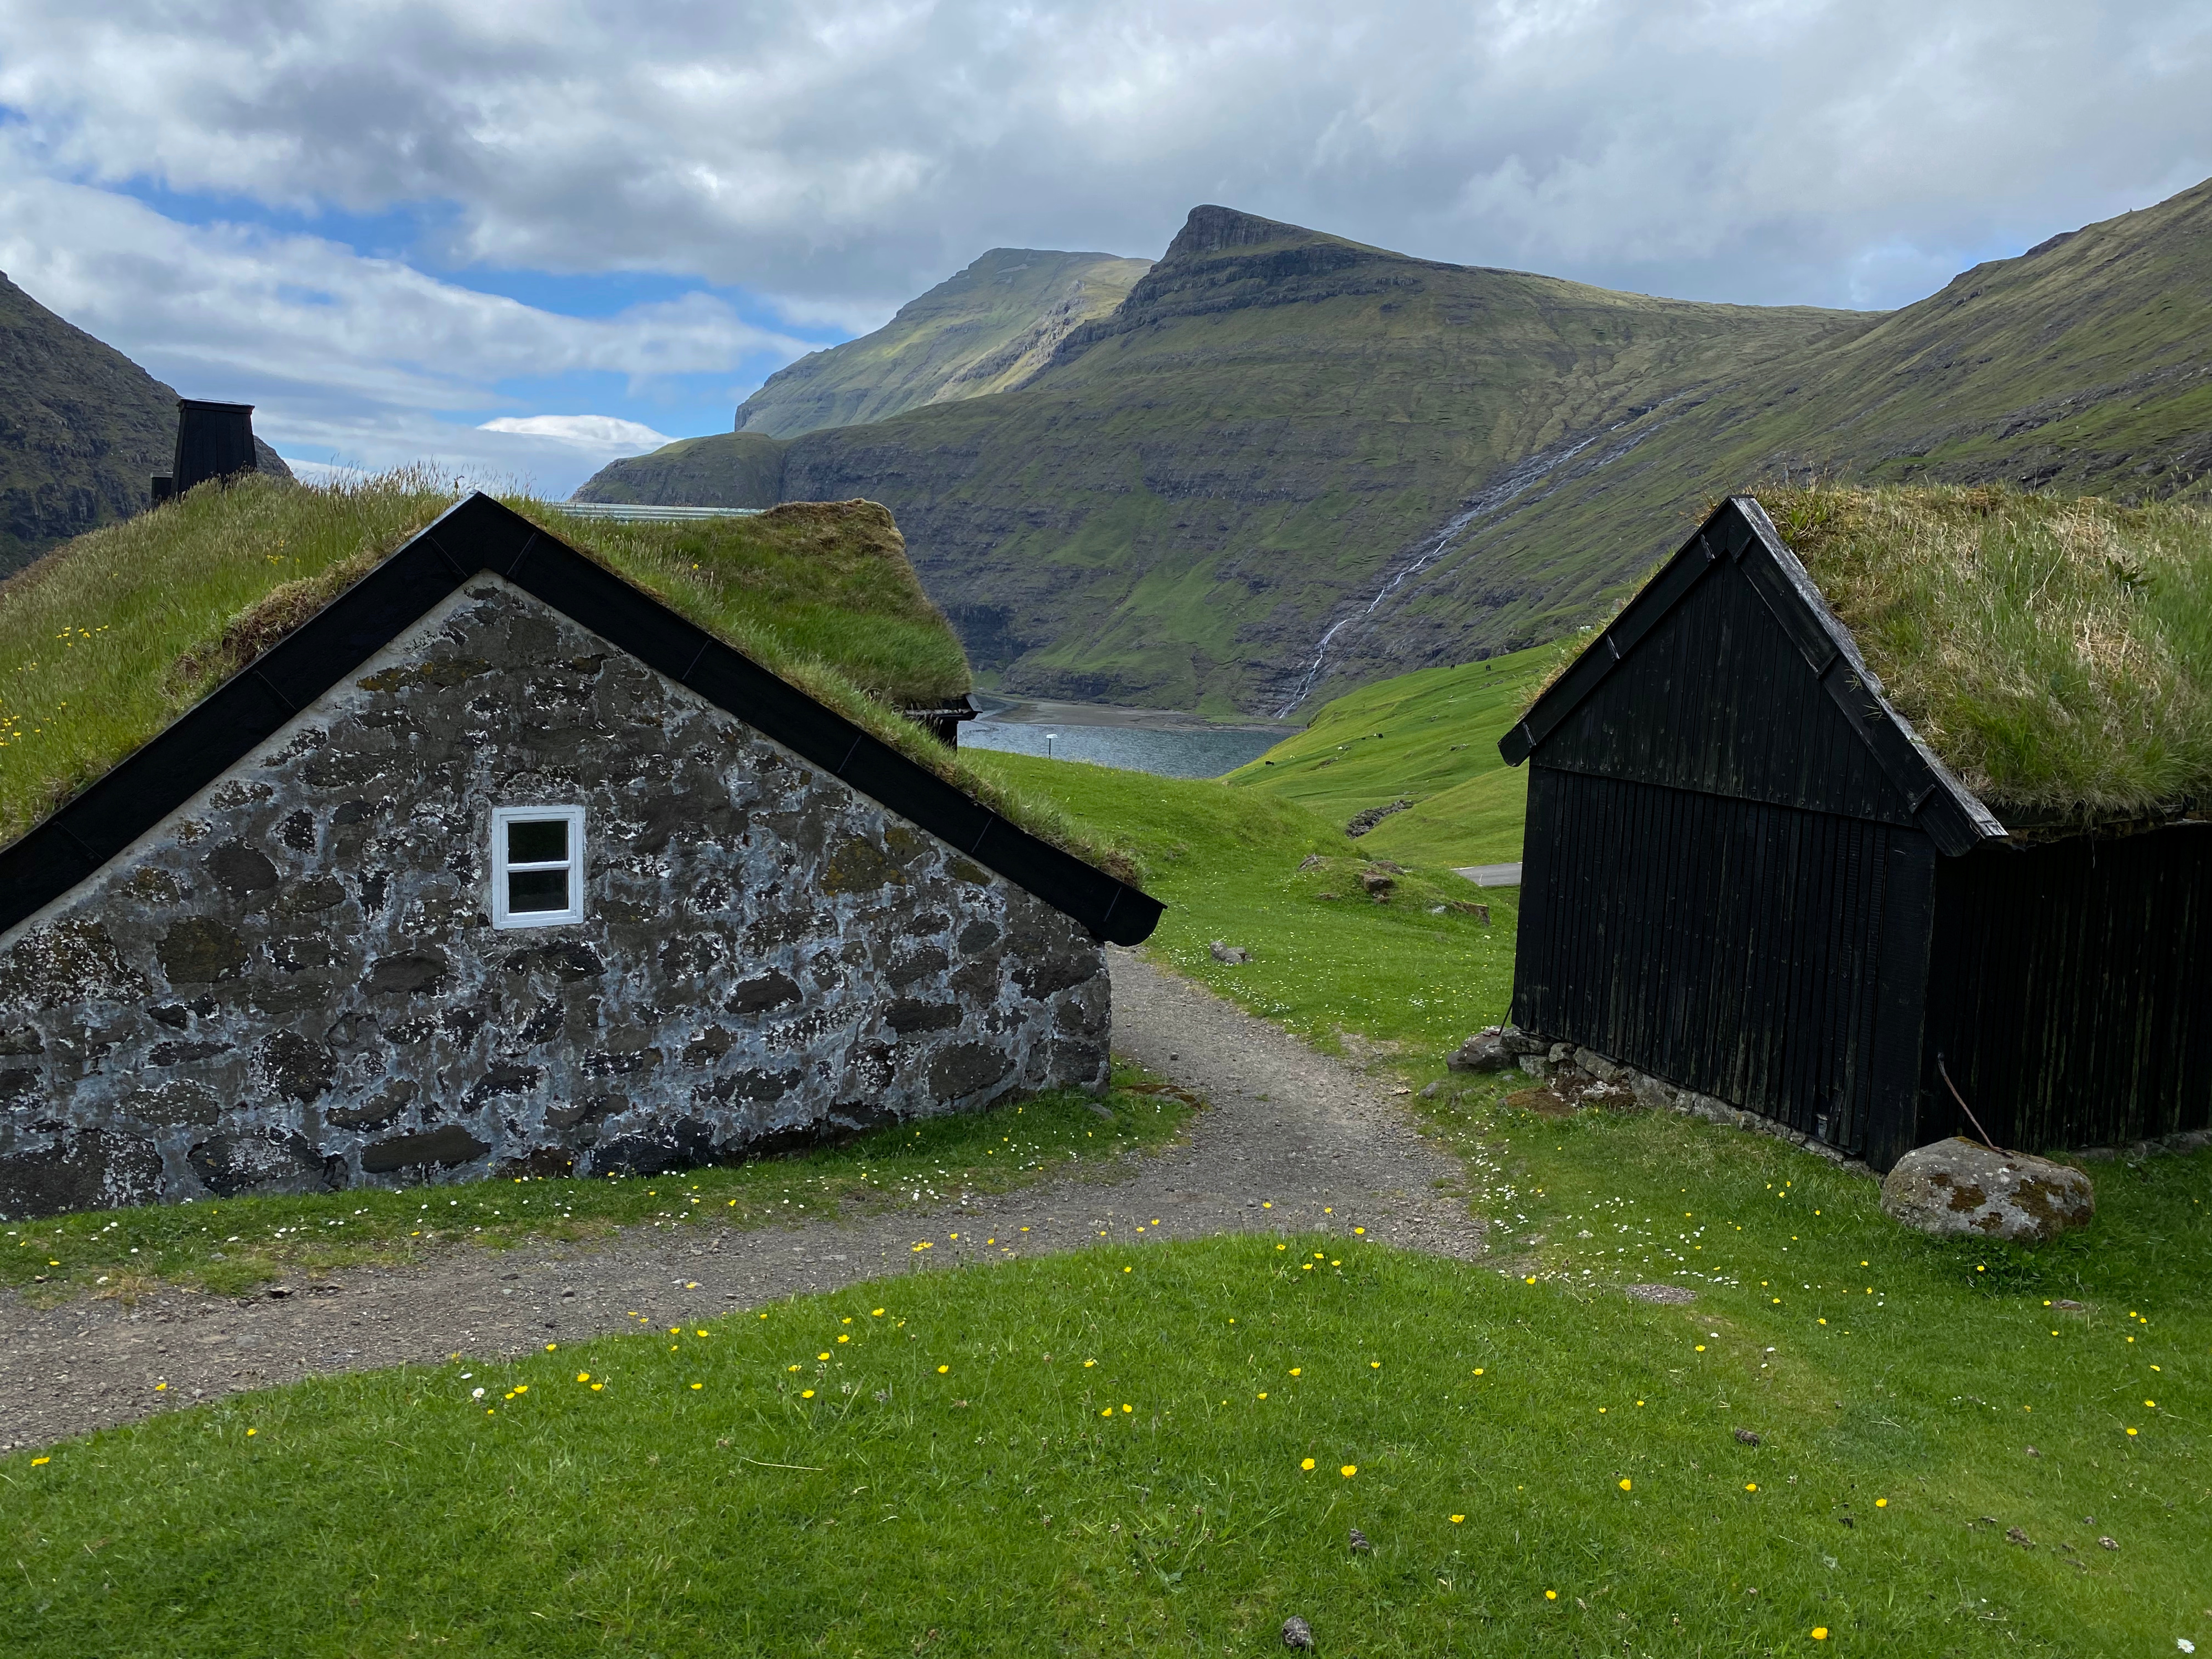 Faroe Islands, Outdoors, Countryside, Housing, Rural, Hut, Nature Images, Shelter, Shack, Grassland, Field, Plant, Grass Backgrounds, Creative Common Images